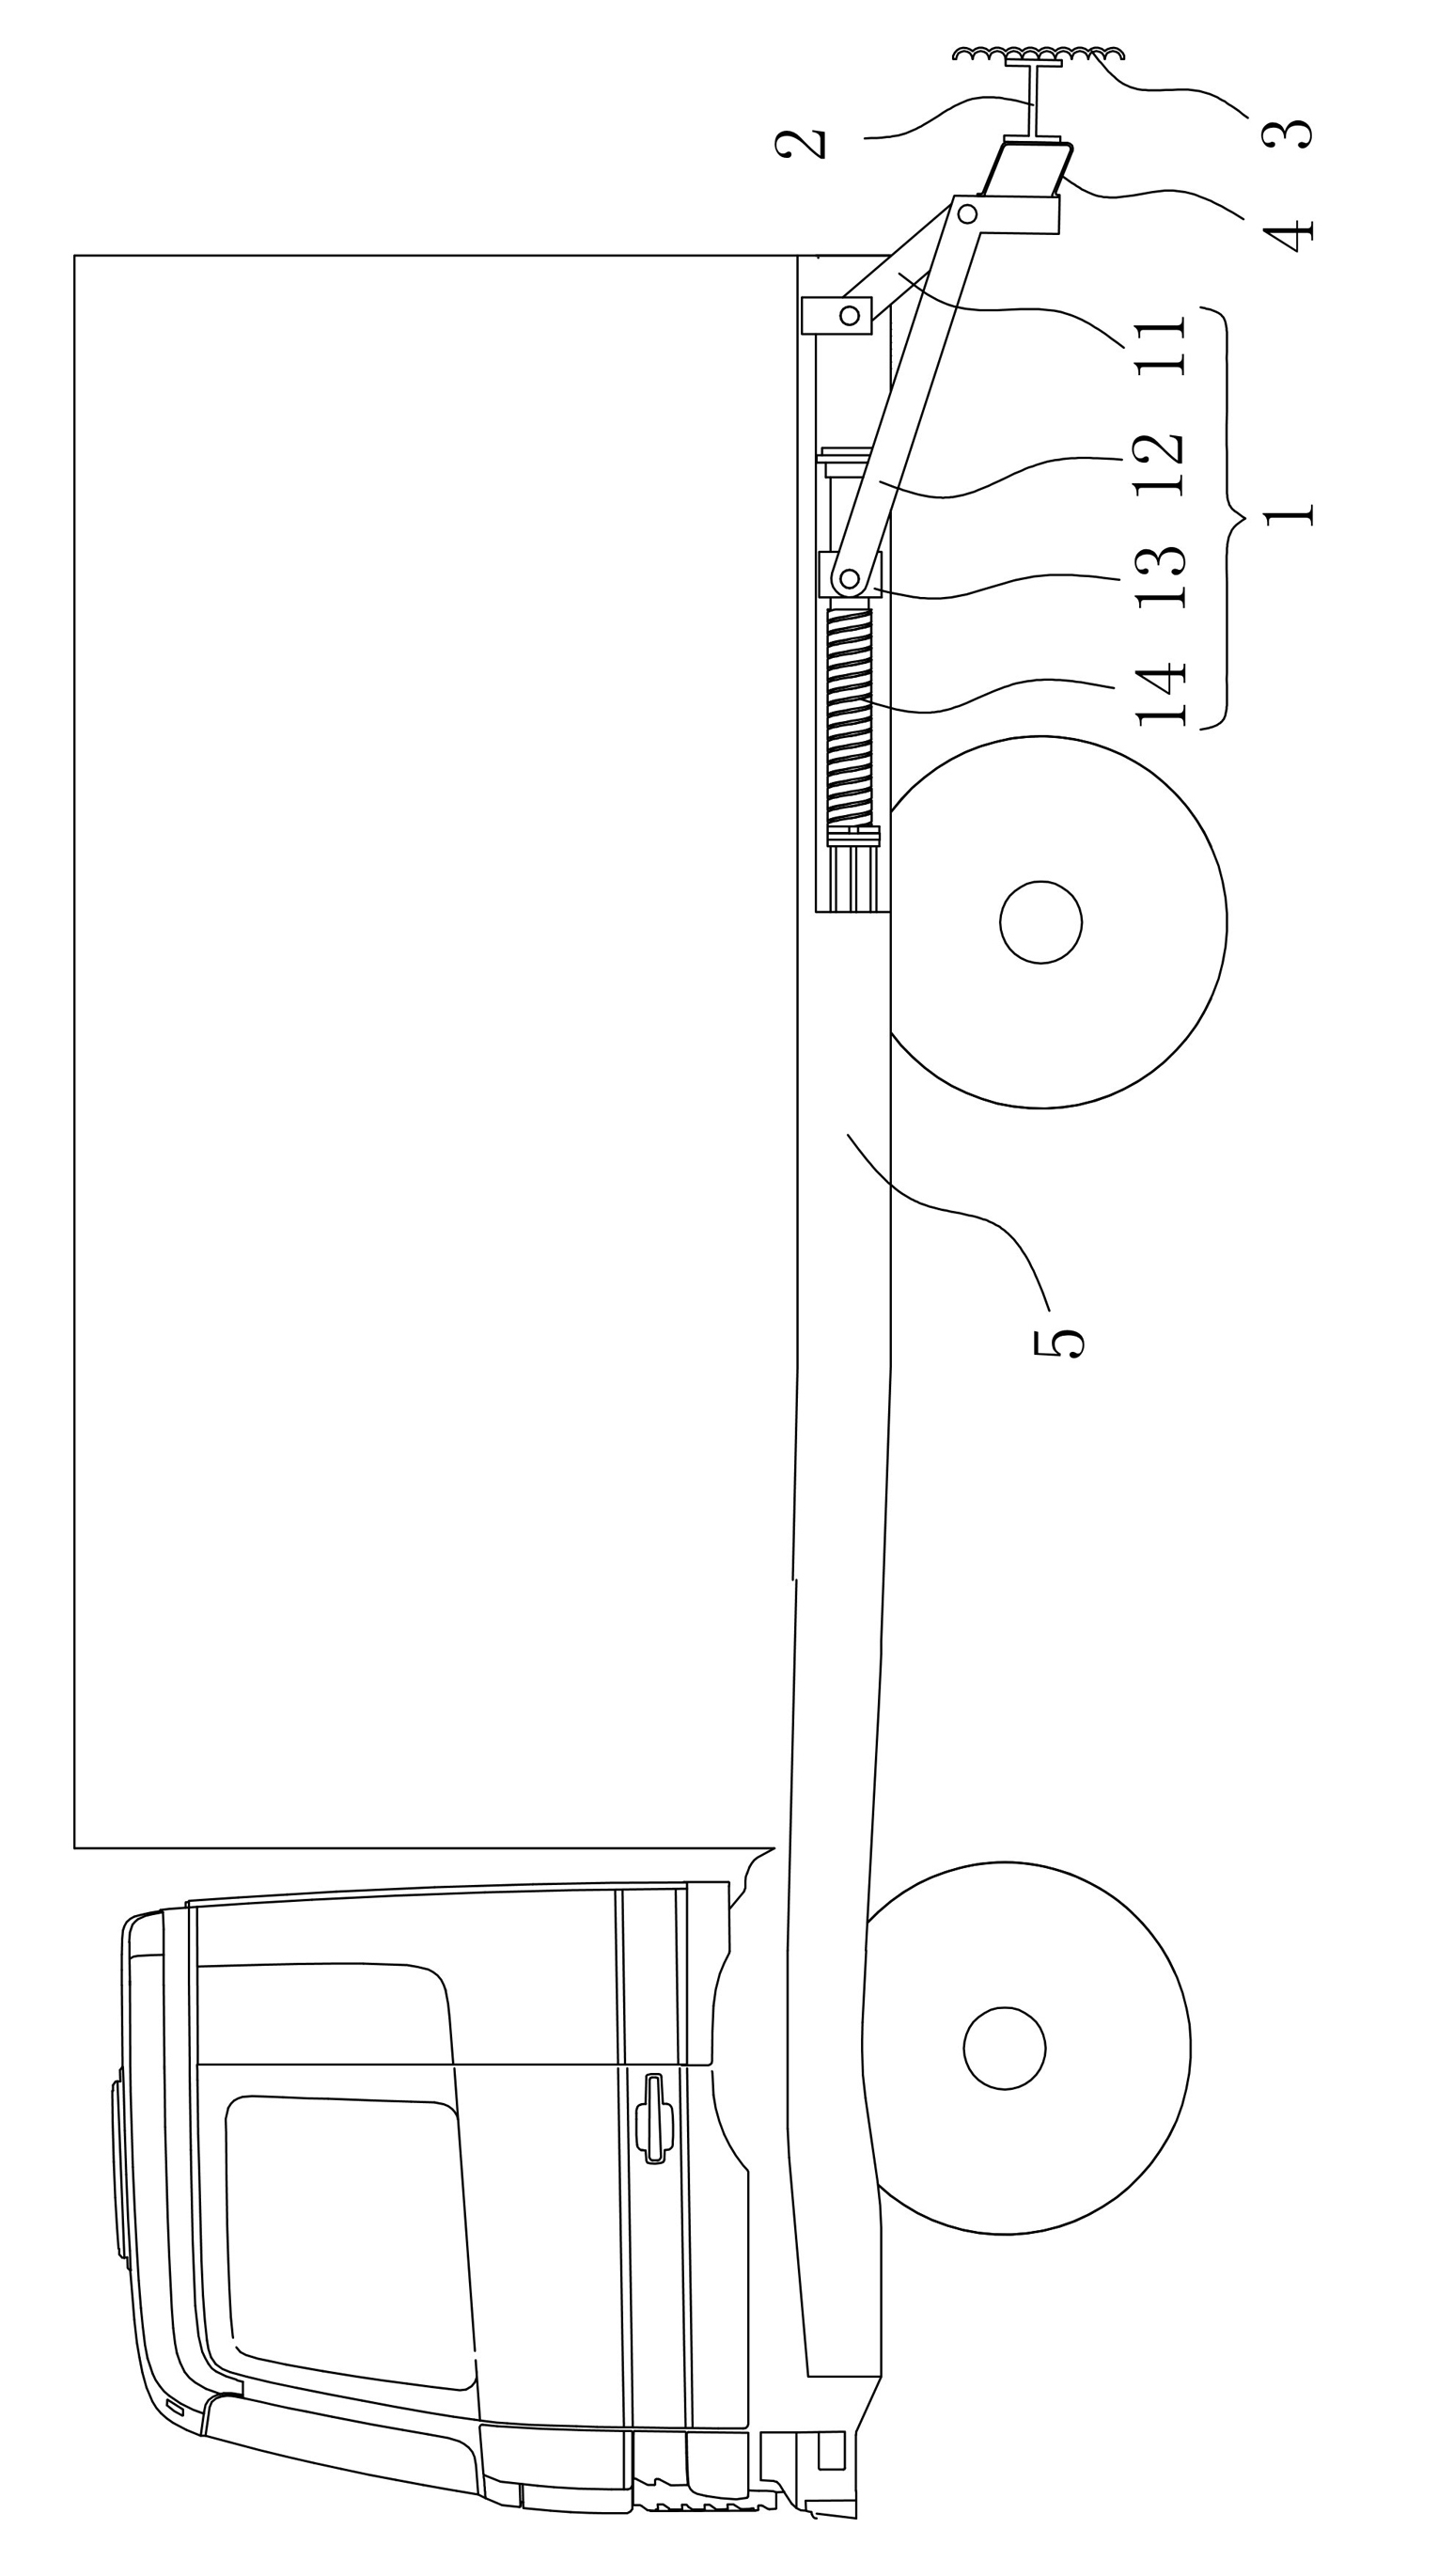 Anticollision device for rear of truck